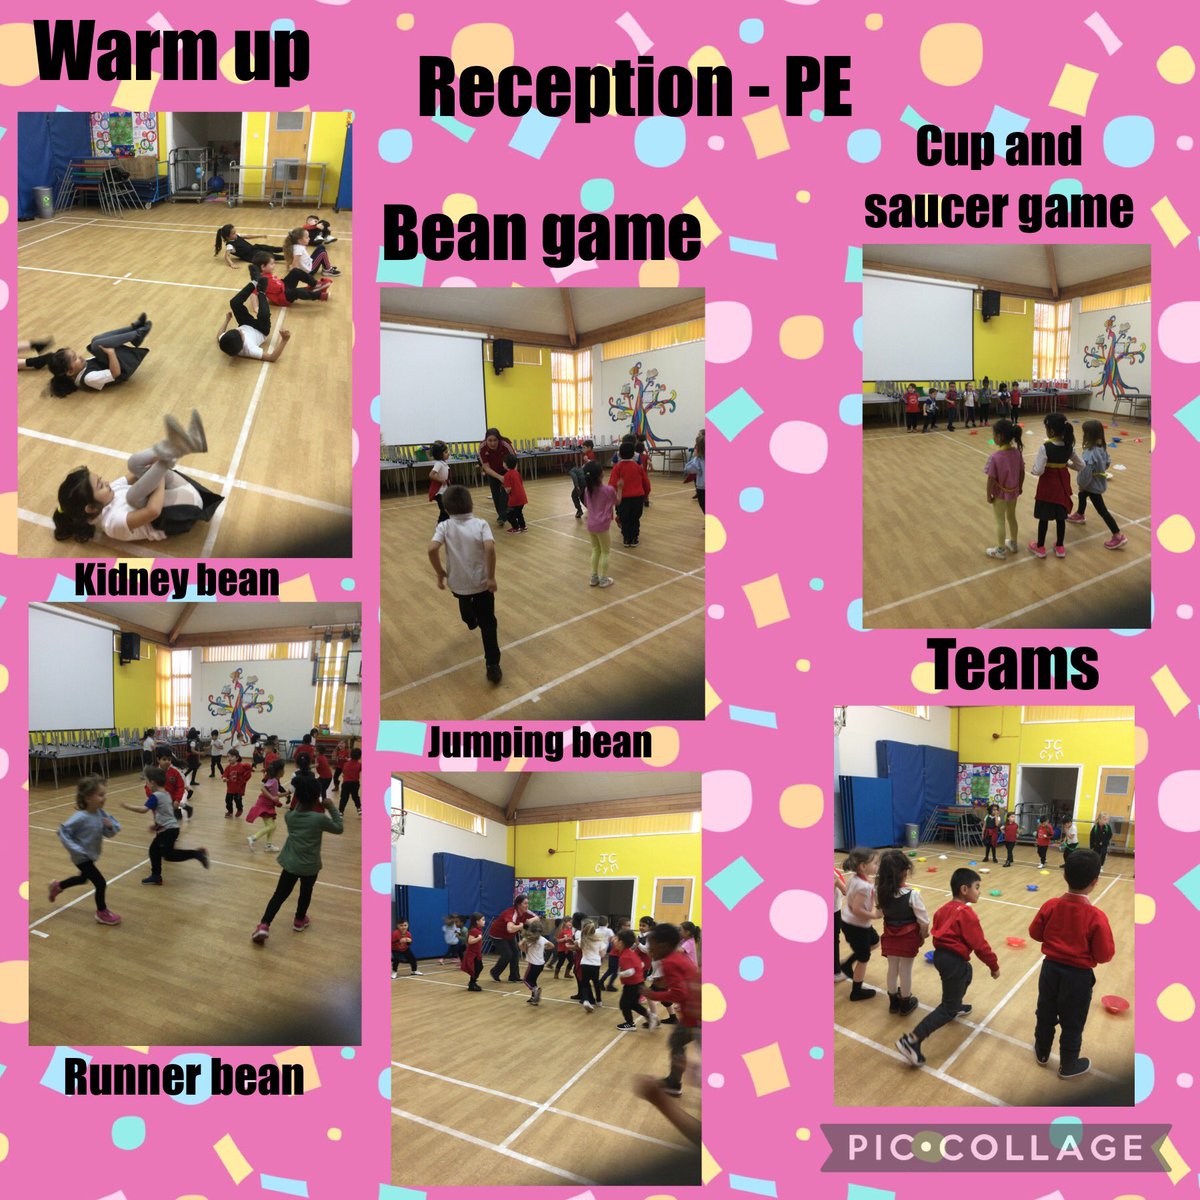 The reception class have had a very exciting time in the hall today. We played games to warm up and move our bodies. #PE #movingourbodies #lifeinreception